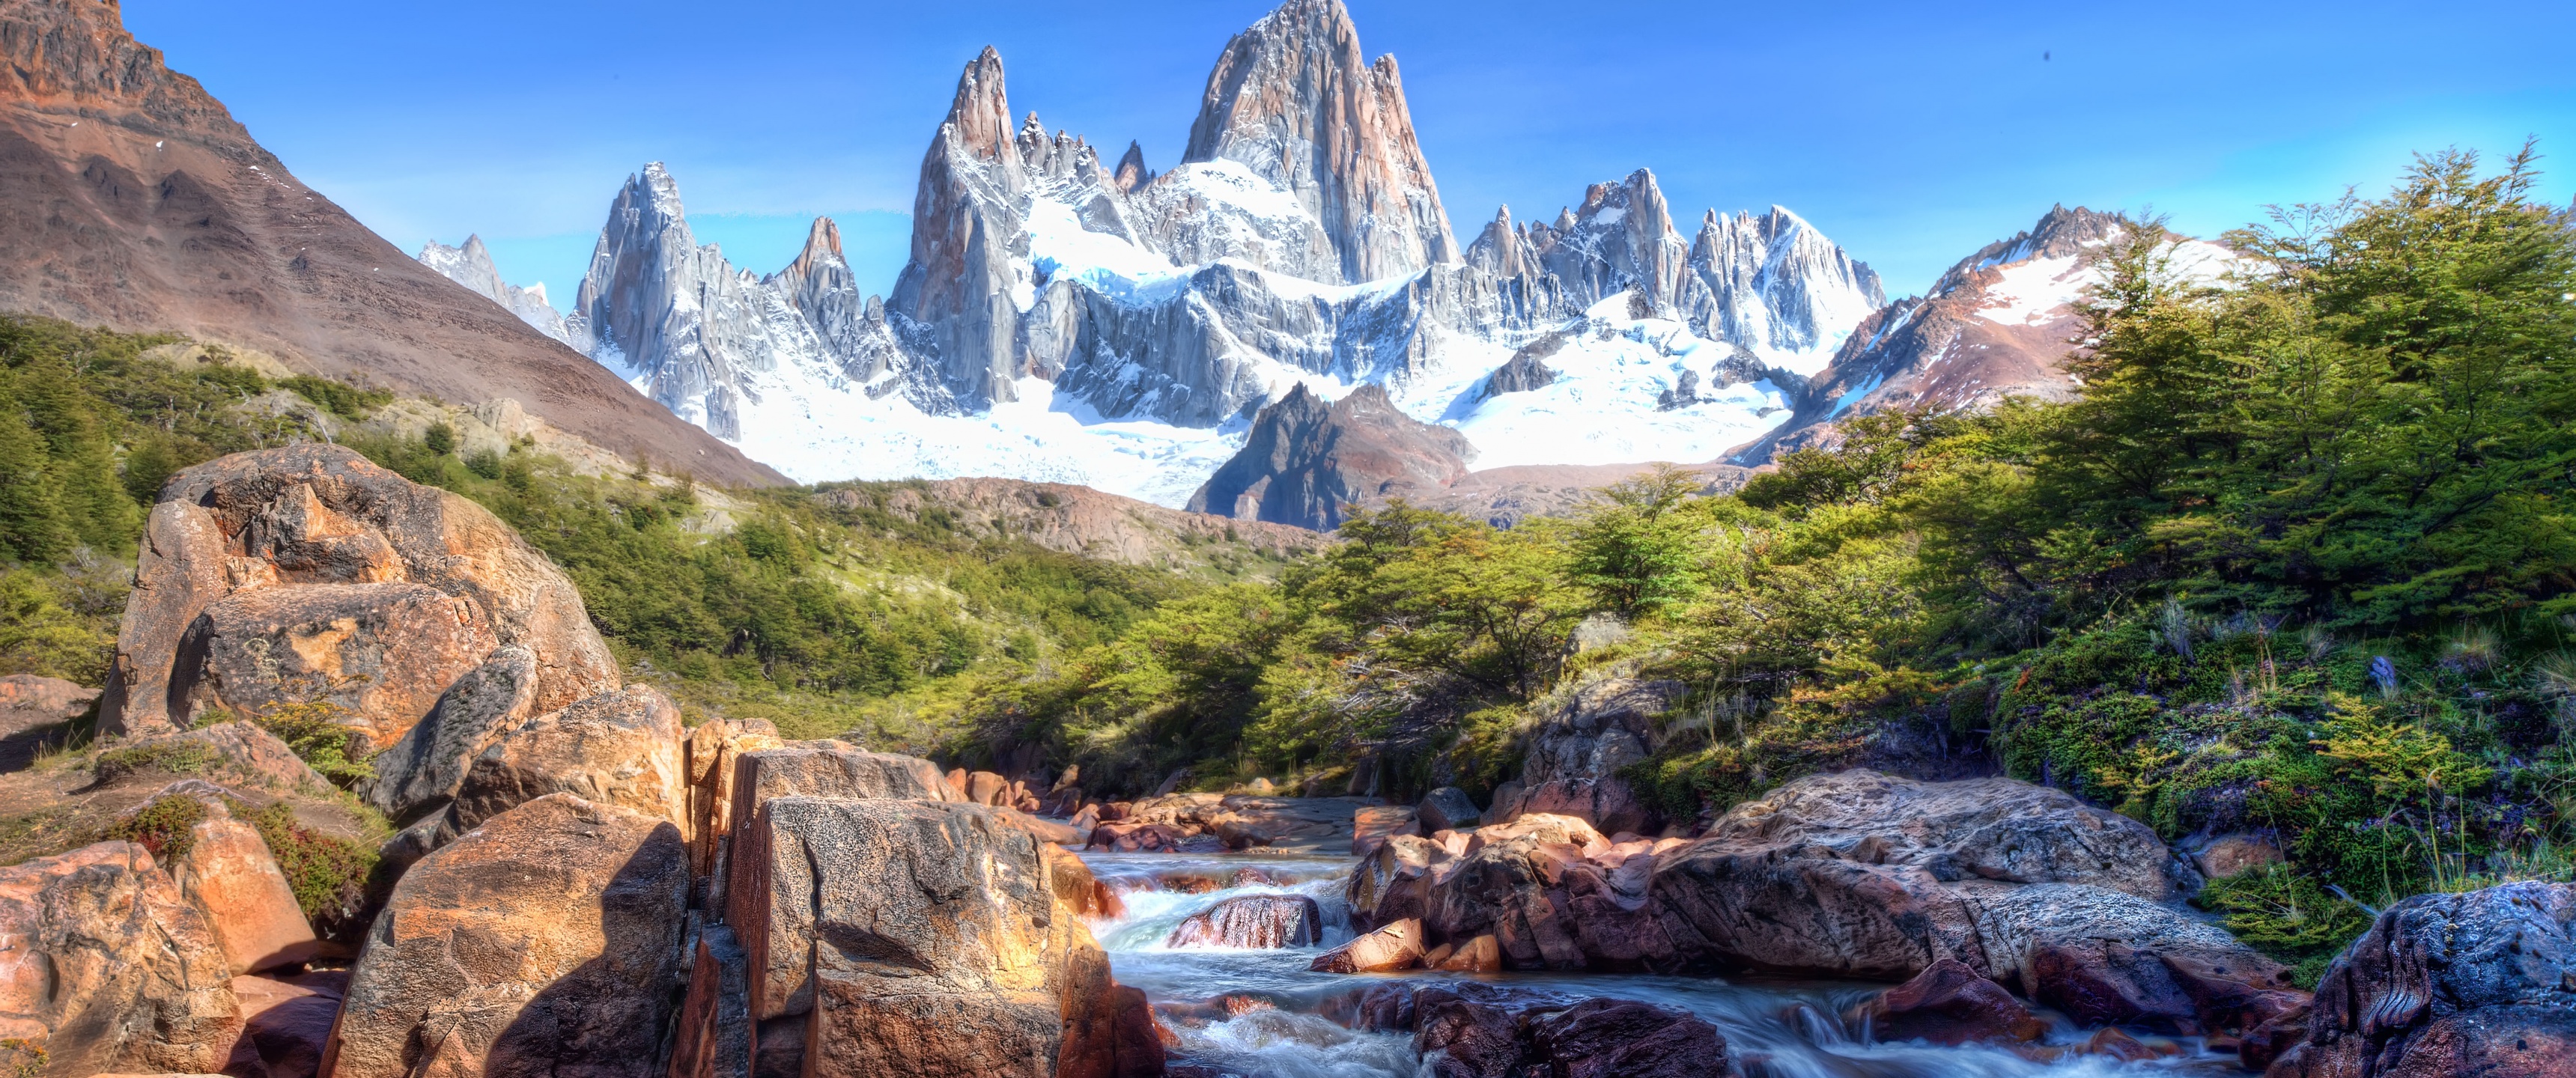 Fitz Roy Wallpaper 4K, Patagonia, Glacier mountains, Snow covered, Nature